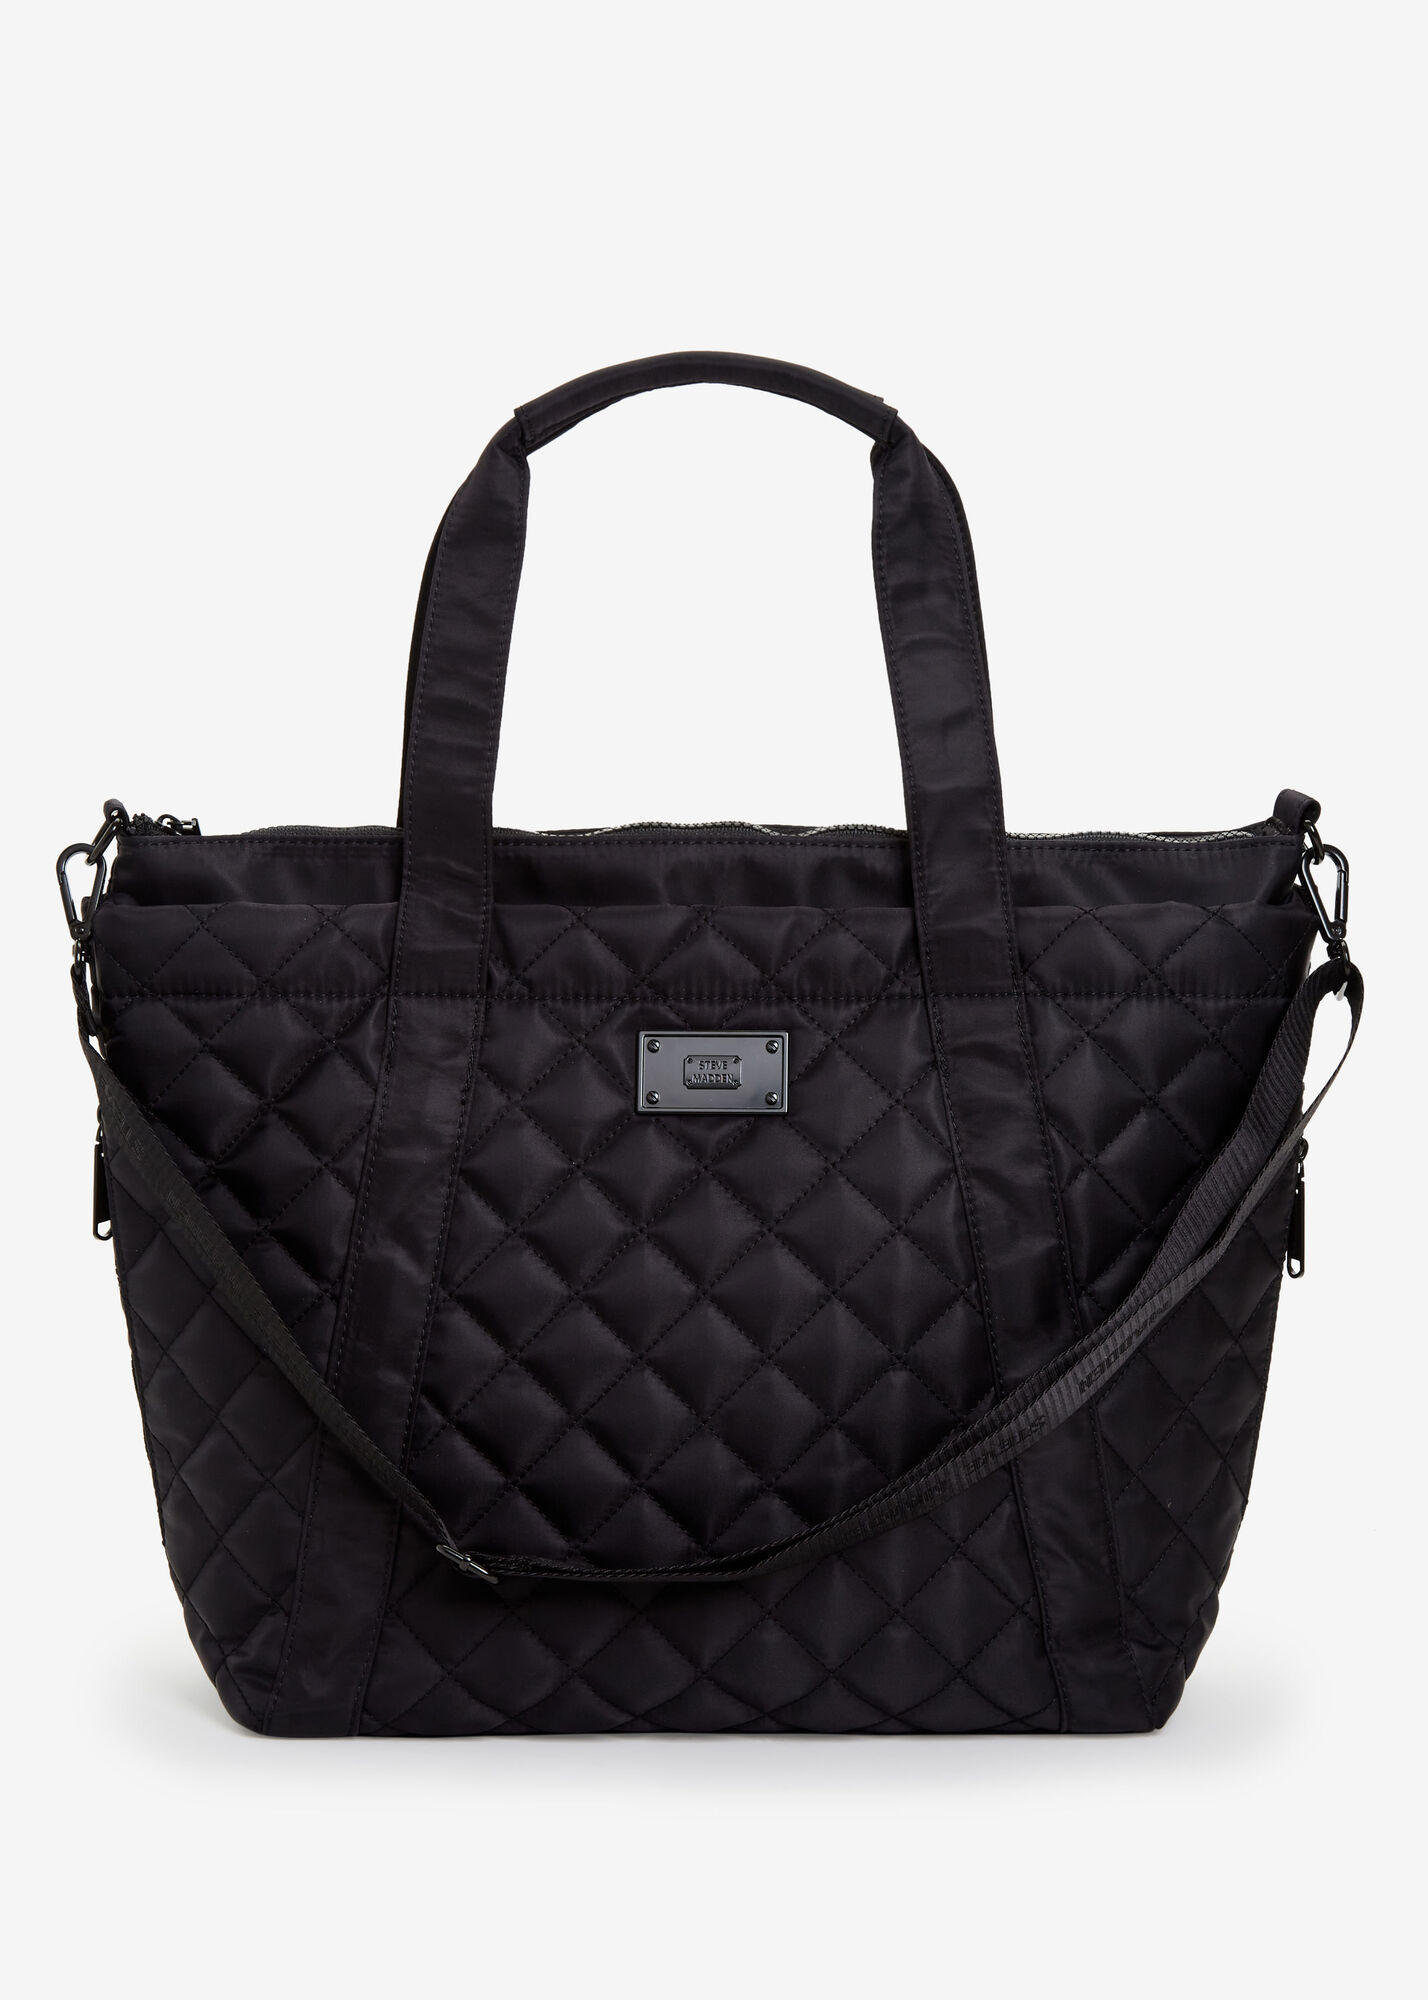 Designer Tote Bags For Women: Leather and Nylon